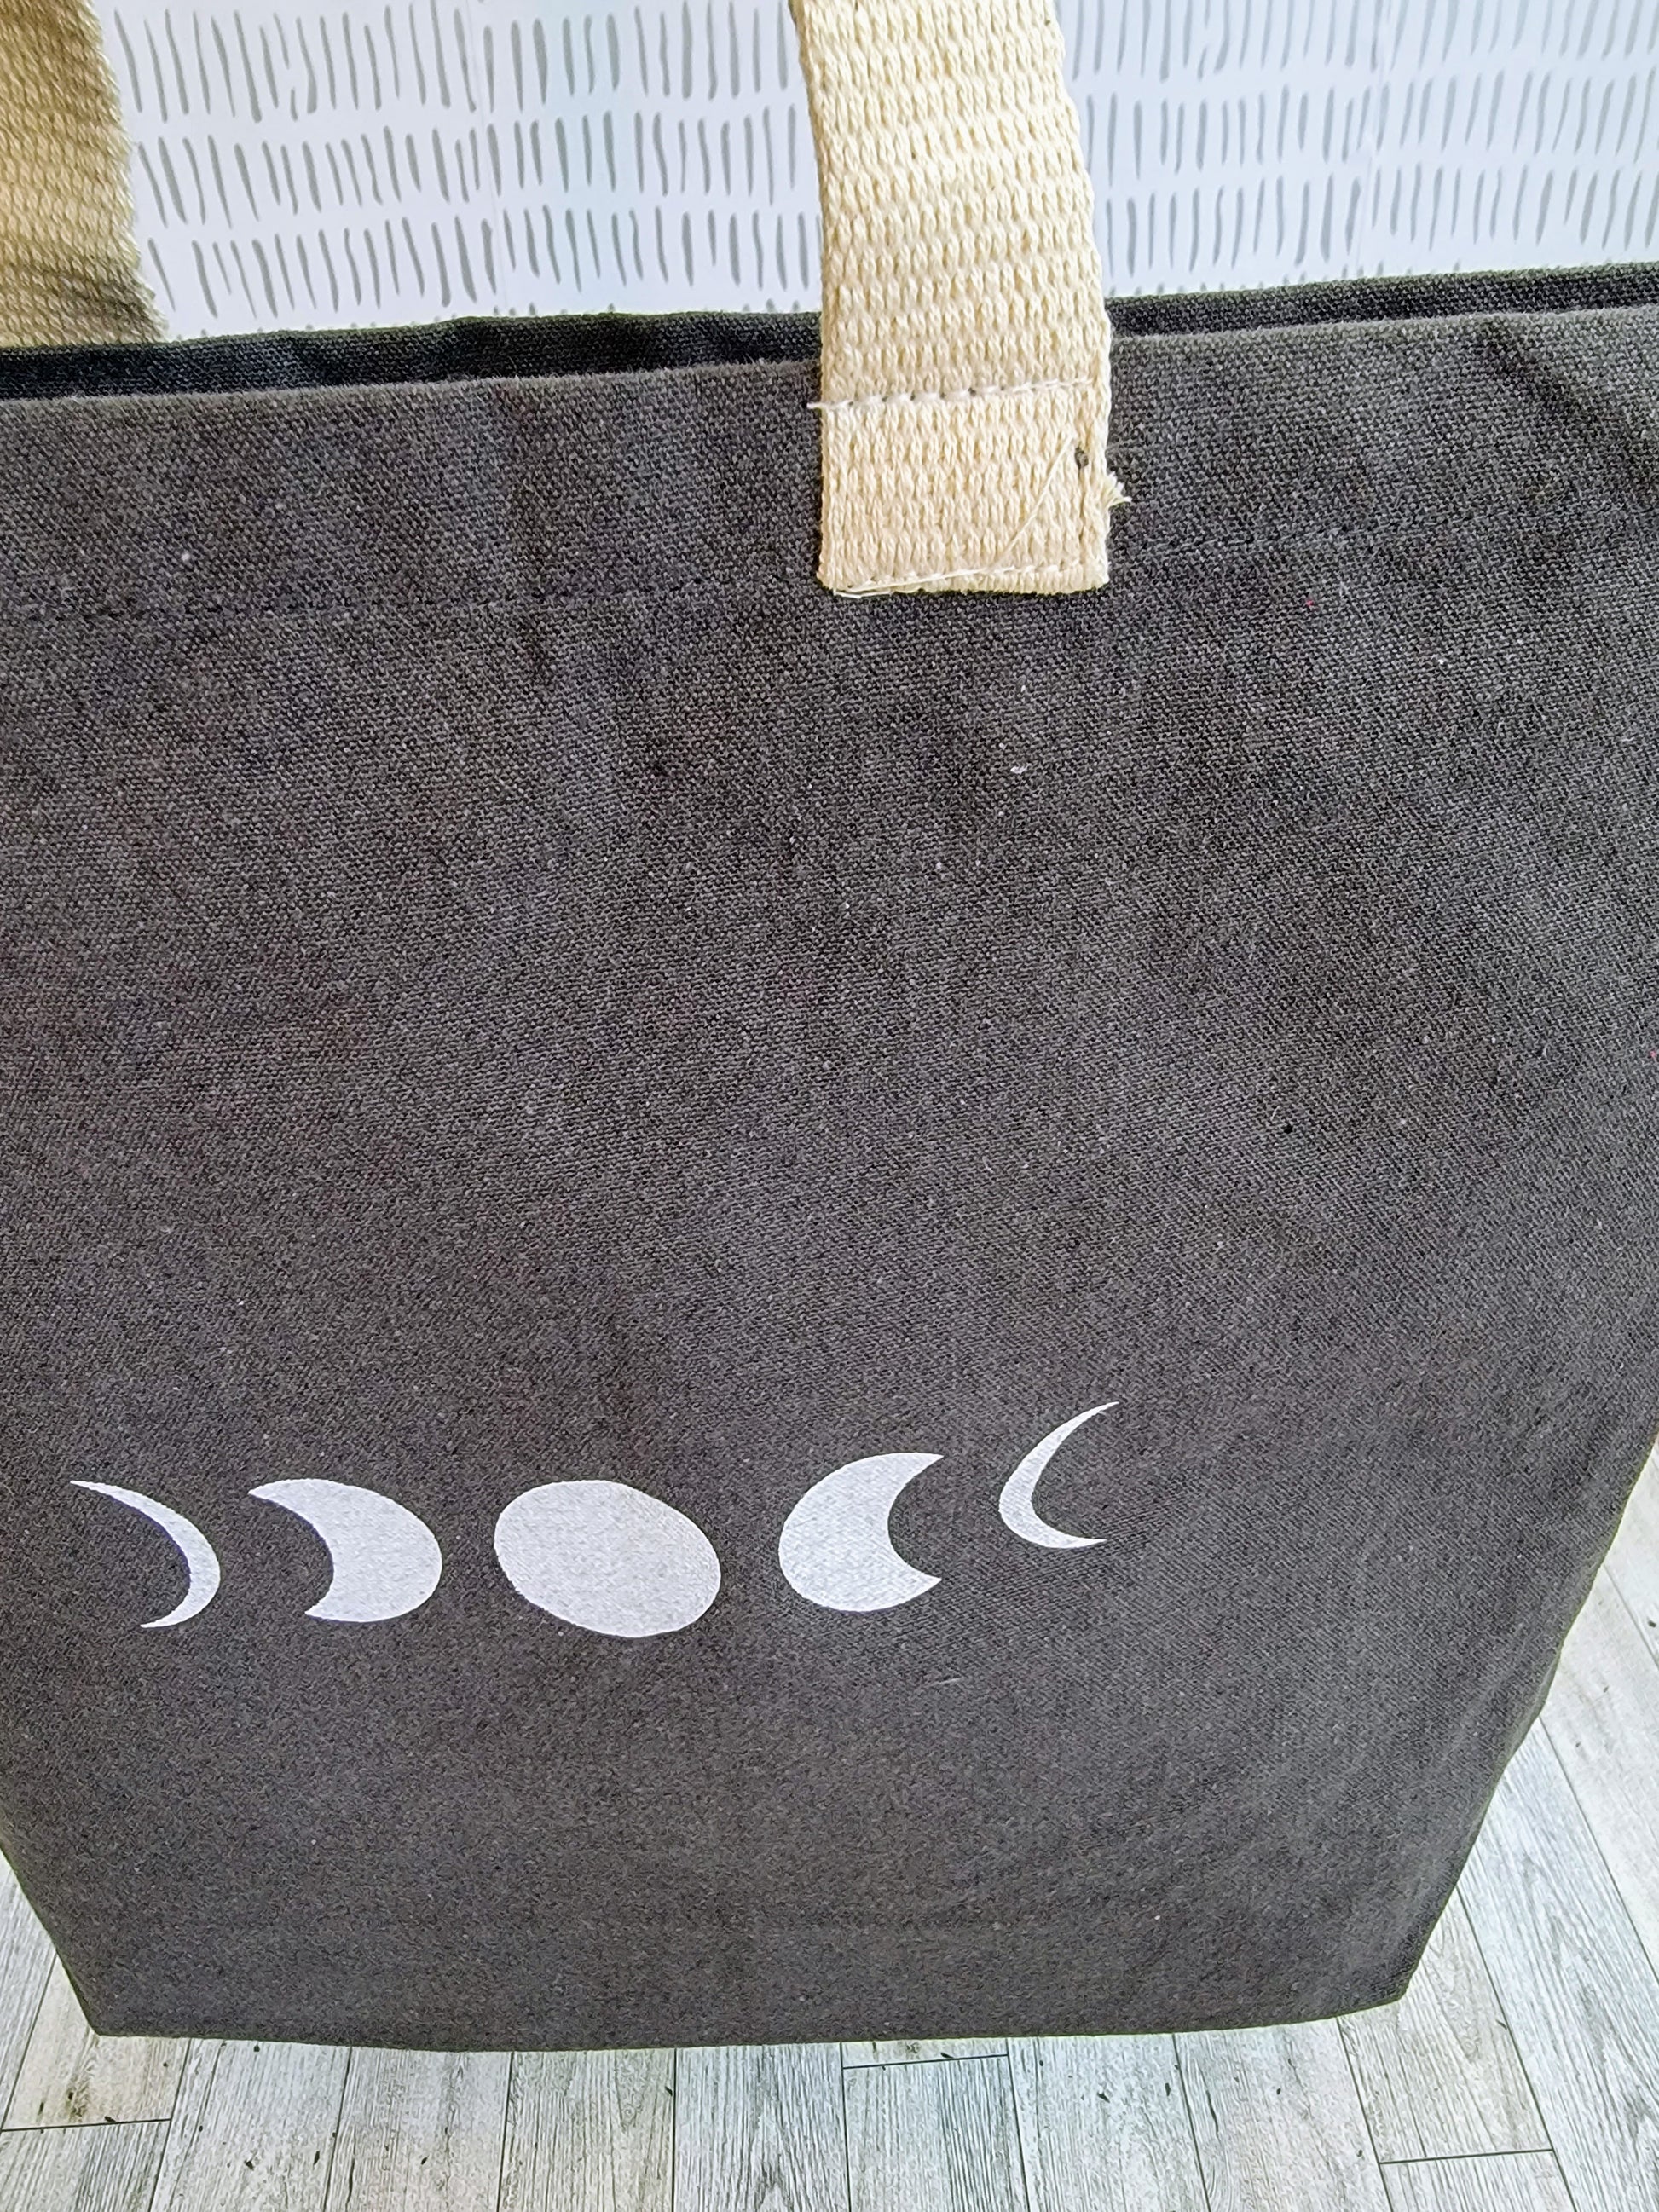 Moon Phases Recycled Canvas Tote Bag - Dark Grey with White Ink - Open Bag Shot